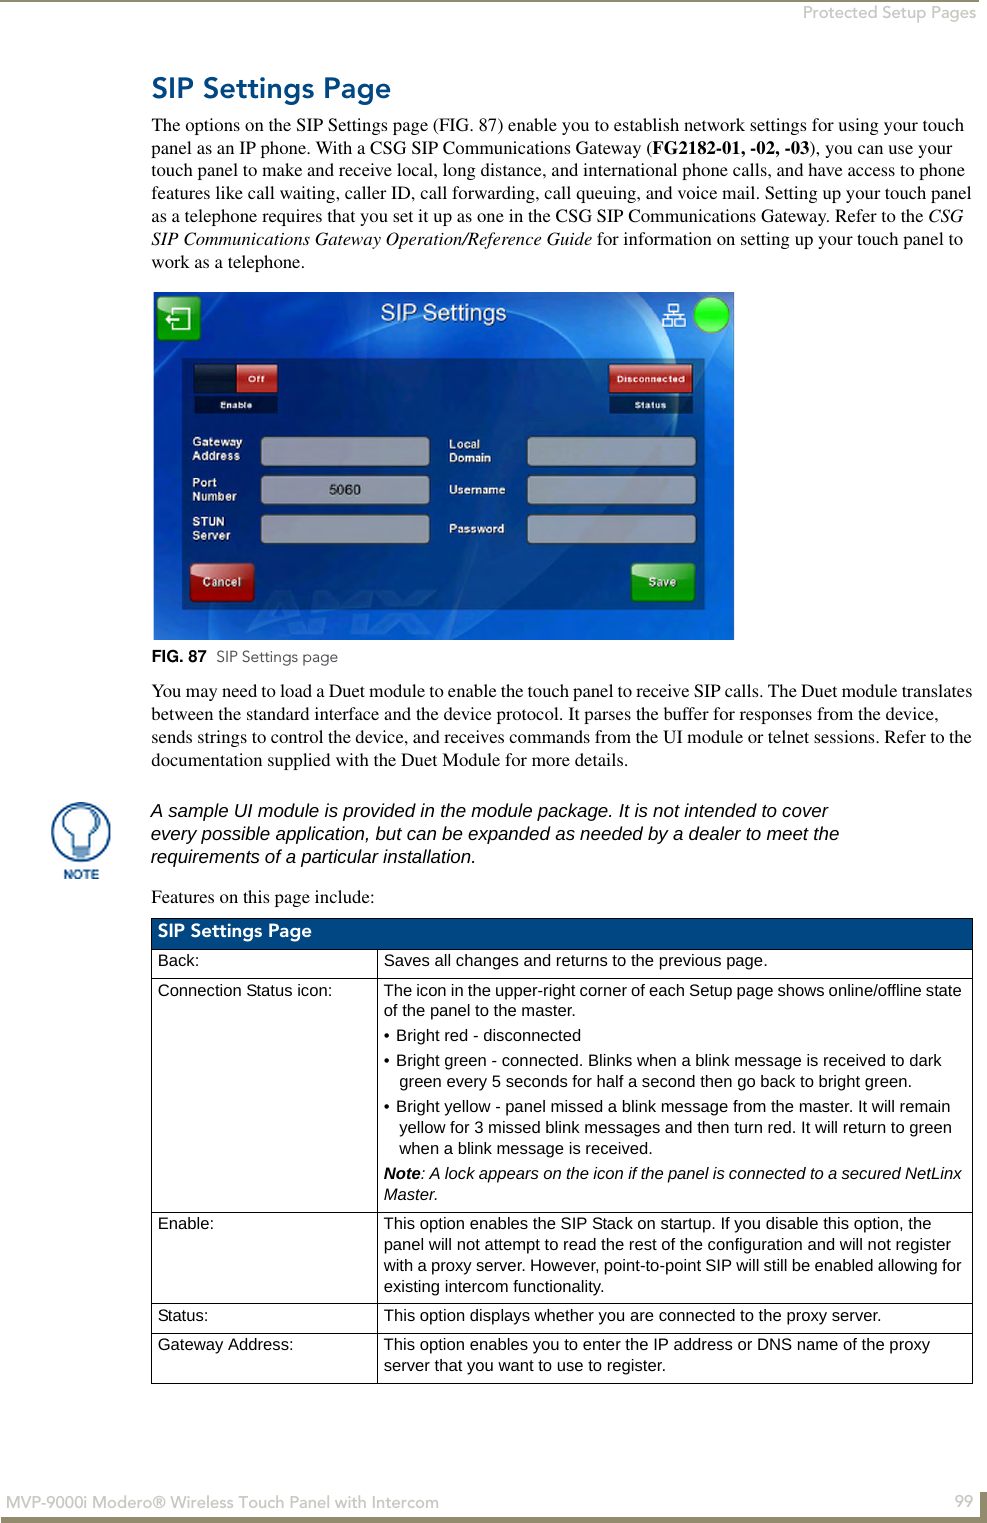 Protected Setup Pages99MVP-9000i Modero® Wireless Touch Panel with IntercomSIP Settings PageThe options on the SIP Settings page (FIG. 87) enable you to establish network settings for using your touch panel as an IP phone. With a CSG SIP Communications Gateway (FG2182-01, -02, -03), you can use your touch panel to make and receive local, long distance, and international phone calls, and have access to phone features like call waiting, caller ID, call forwarding, call queuing, and voice mail. Setting up your touch panel as a telephone requires that you set it up as one in the CSG SIP Communications Gateway. Refer to the CSG SIP Communications Gateway Operation/Reference Guide for information on setting up your touch panel to work as a telephone.You may need to load a Duet module to enable the touch panel to receive SIP calls. The Duet module translates between the standard interface and the device protocol. It parses the buffer for responses from the device, sends strings to control the device, and receives commands from the UI module or telnet sessions. Refer to the documentation supplied with the Duet Module for more details.Features on this page include: FIG. 87  SIP Settings pageA sample UI module is provided in the module package. It is not intended to cover every possible application, but can be expanded as needed by a dealer to meet the requirements of a particular installation. SIP Settings Page Back: Saves all changes and returns to the previous page.Connection Status icon: The icon in the upper-right corner of each Setup page shows online/offline state of the panel to the master.• Bright red - disconnected• Bright green - connected. Blinks when a blink message is received to dark green every 5 seconds for half a second then go back to bright green.• Bright yellow - panel missed a blink message from the master. It will remain yellow for 3 missed blink messages and then turn red. It will return to green when a blink message is received.Note: A lock appears on the icon if the panel is connected to a secured NetLinx Master.Enable: This option enables the SIP Stack on startup. If you disable this option, the panel will not attempt to read the rest of the configuration and will not register with a proxy server. However, point-to-point SIP will still be enabled allowing for existing intercom functionality.Status: This option displays whether you are connected to the proxy server.Gateway Address: This option enables you to enter the IP address or DNS name of the proxy server that you want to use to register.